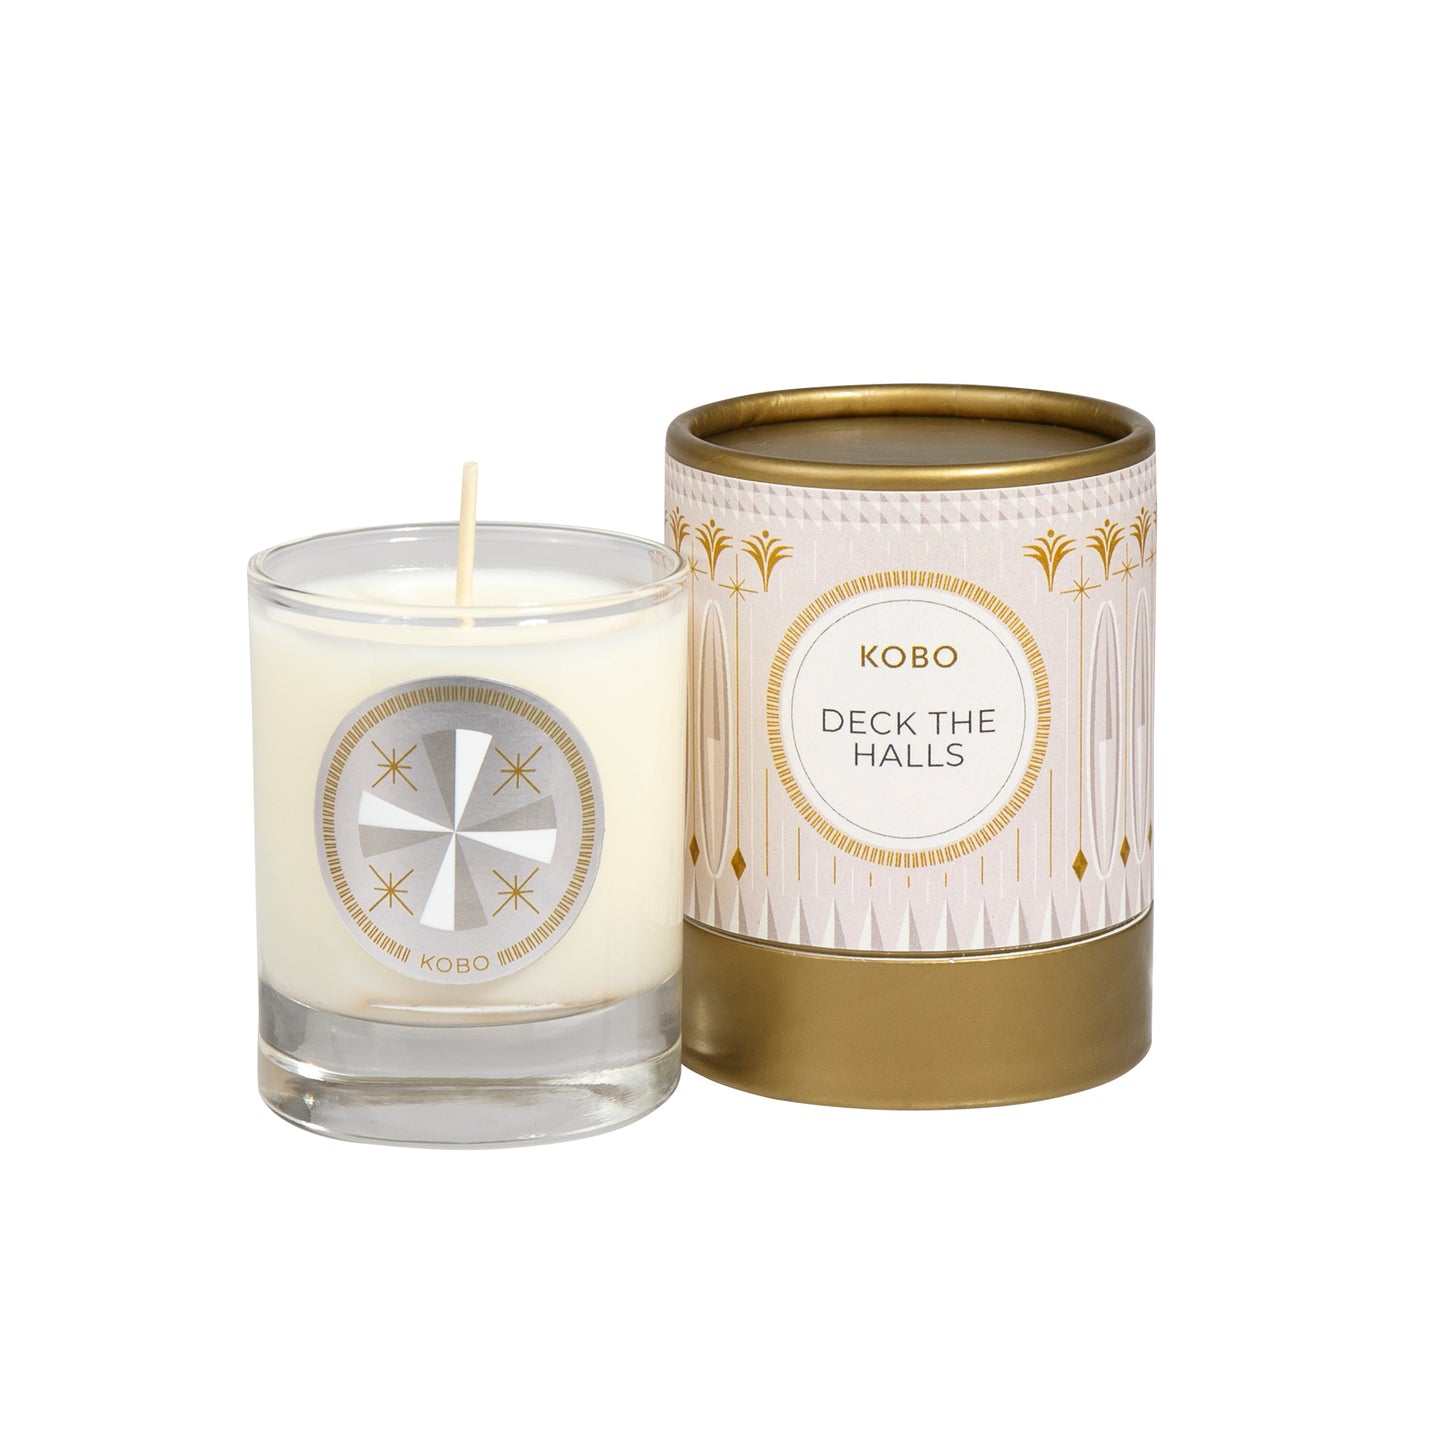 Primary Image of Deck The Halls Votive Candle